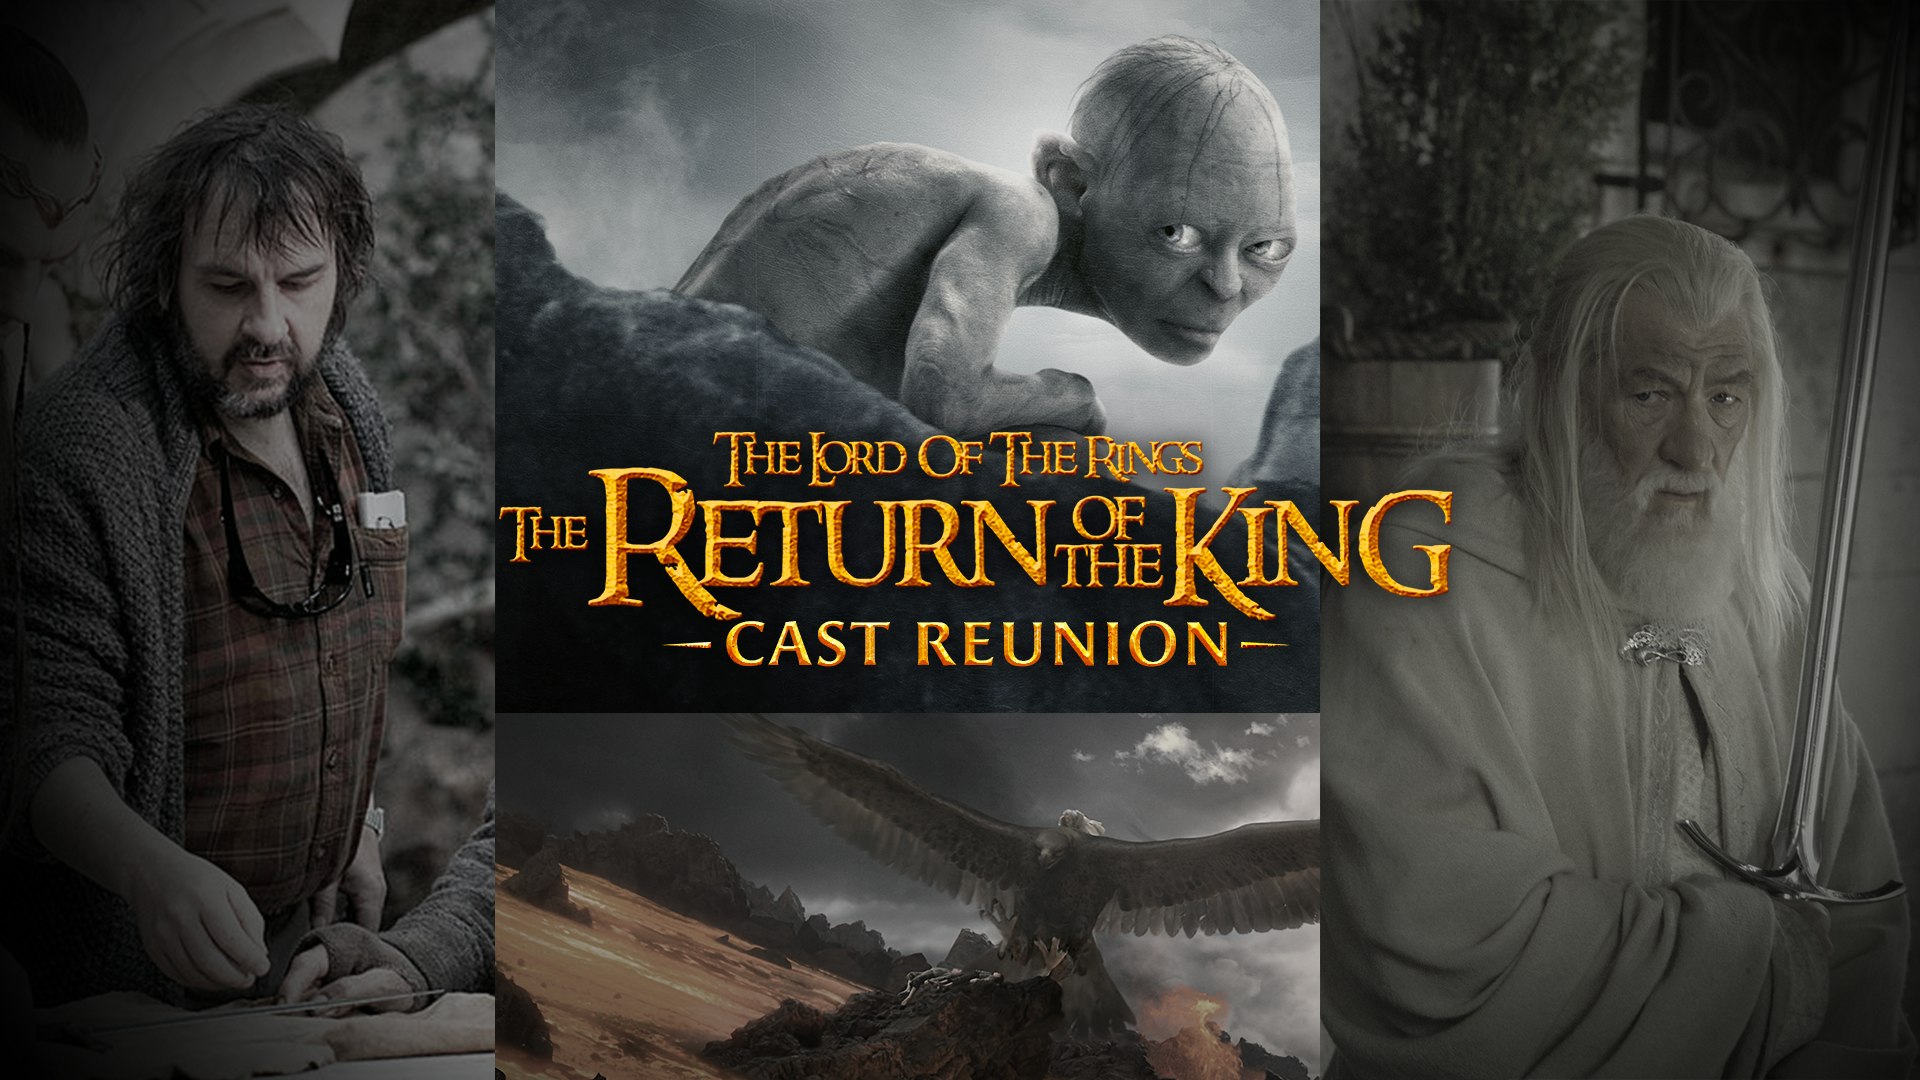 The Lord of the Rings: The Return of the King 20th Anniversary